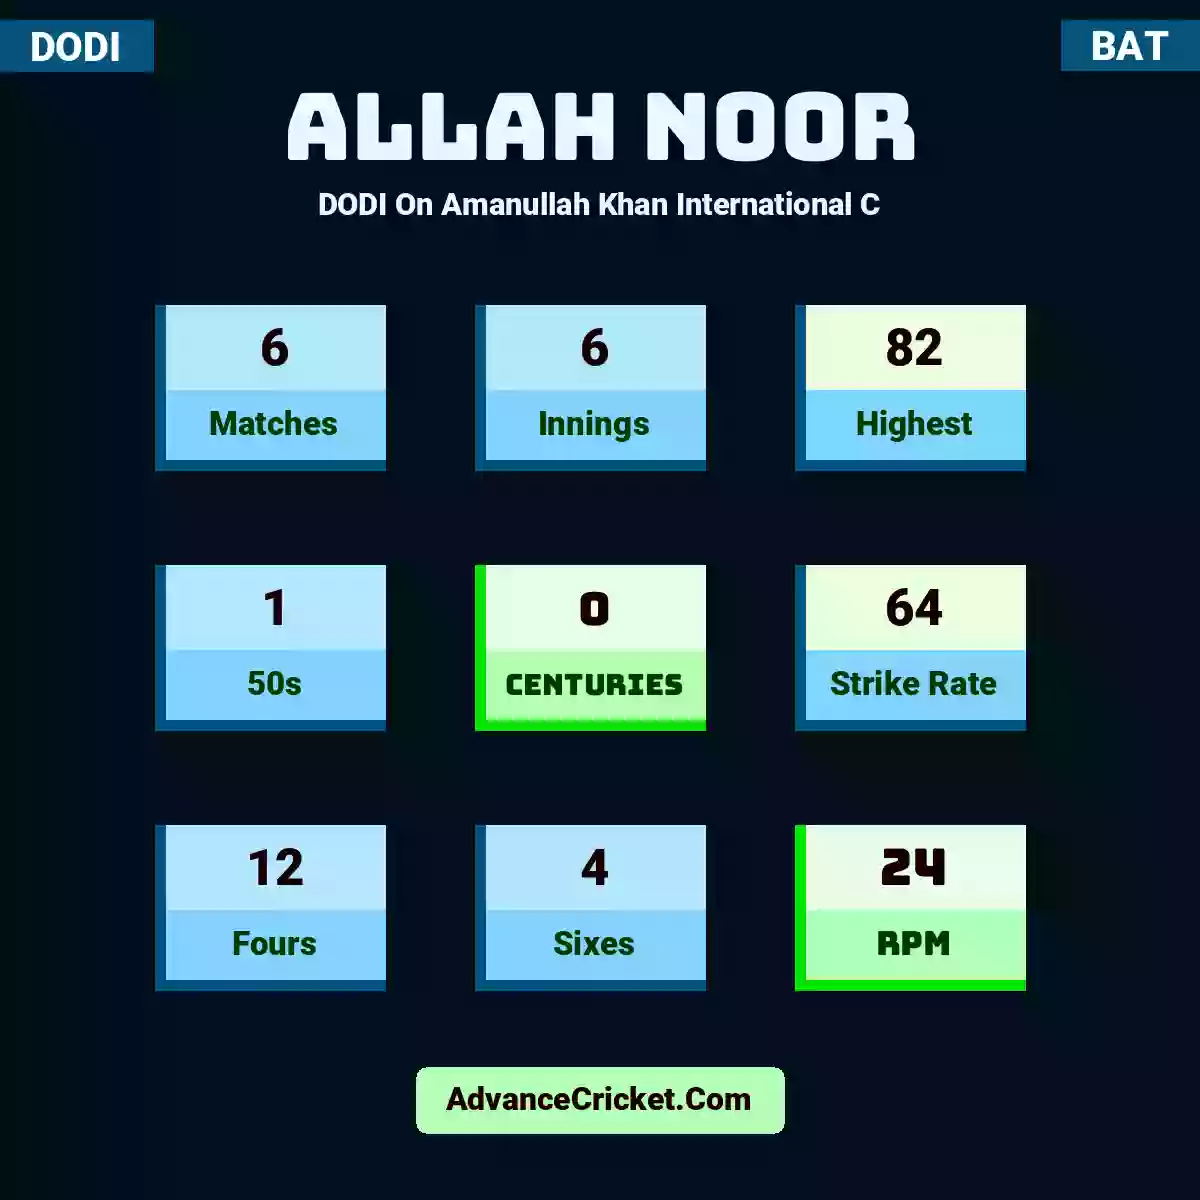 Allah Noor DODI  On Amanullah Khan International C, Allah Noor played 6 matches, scored 82 runs as highest, 1 half-centuries, and 0 centuries, with a strike rate of 64. A.Noor hit 12 fours and 4 sixes, with an RPM of 24.